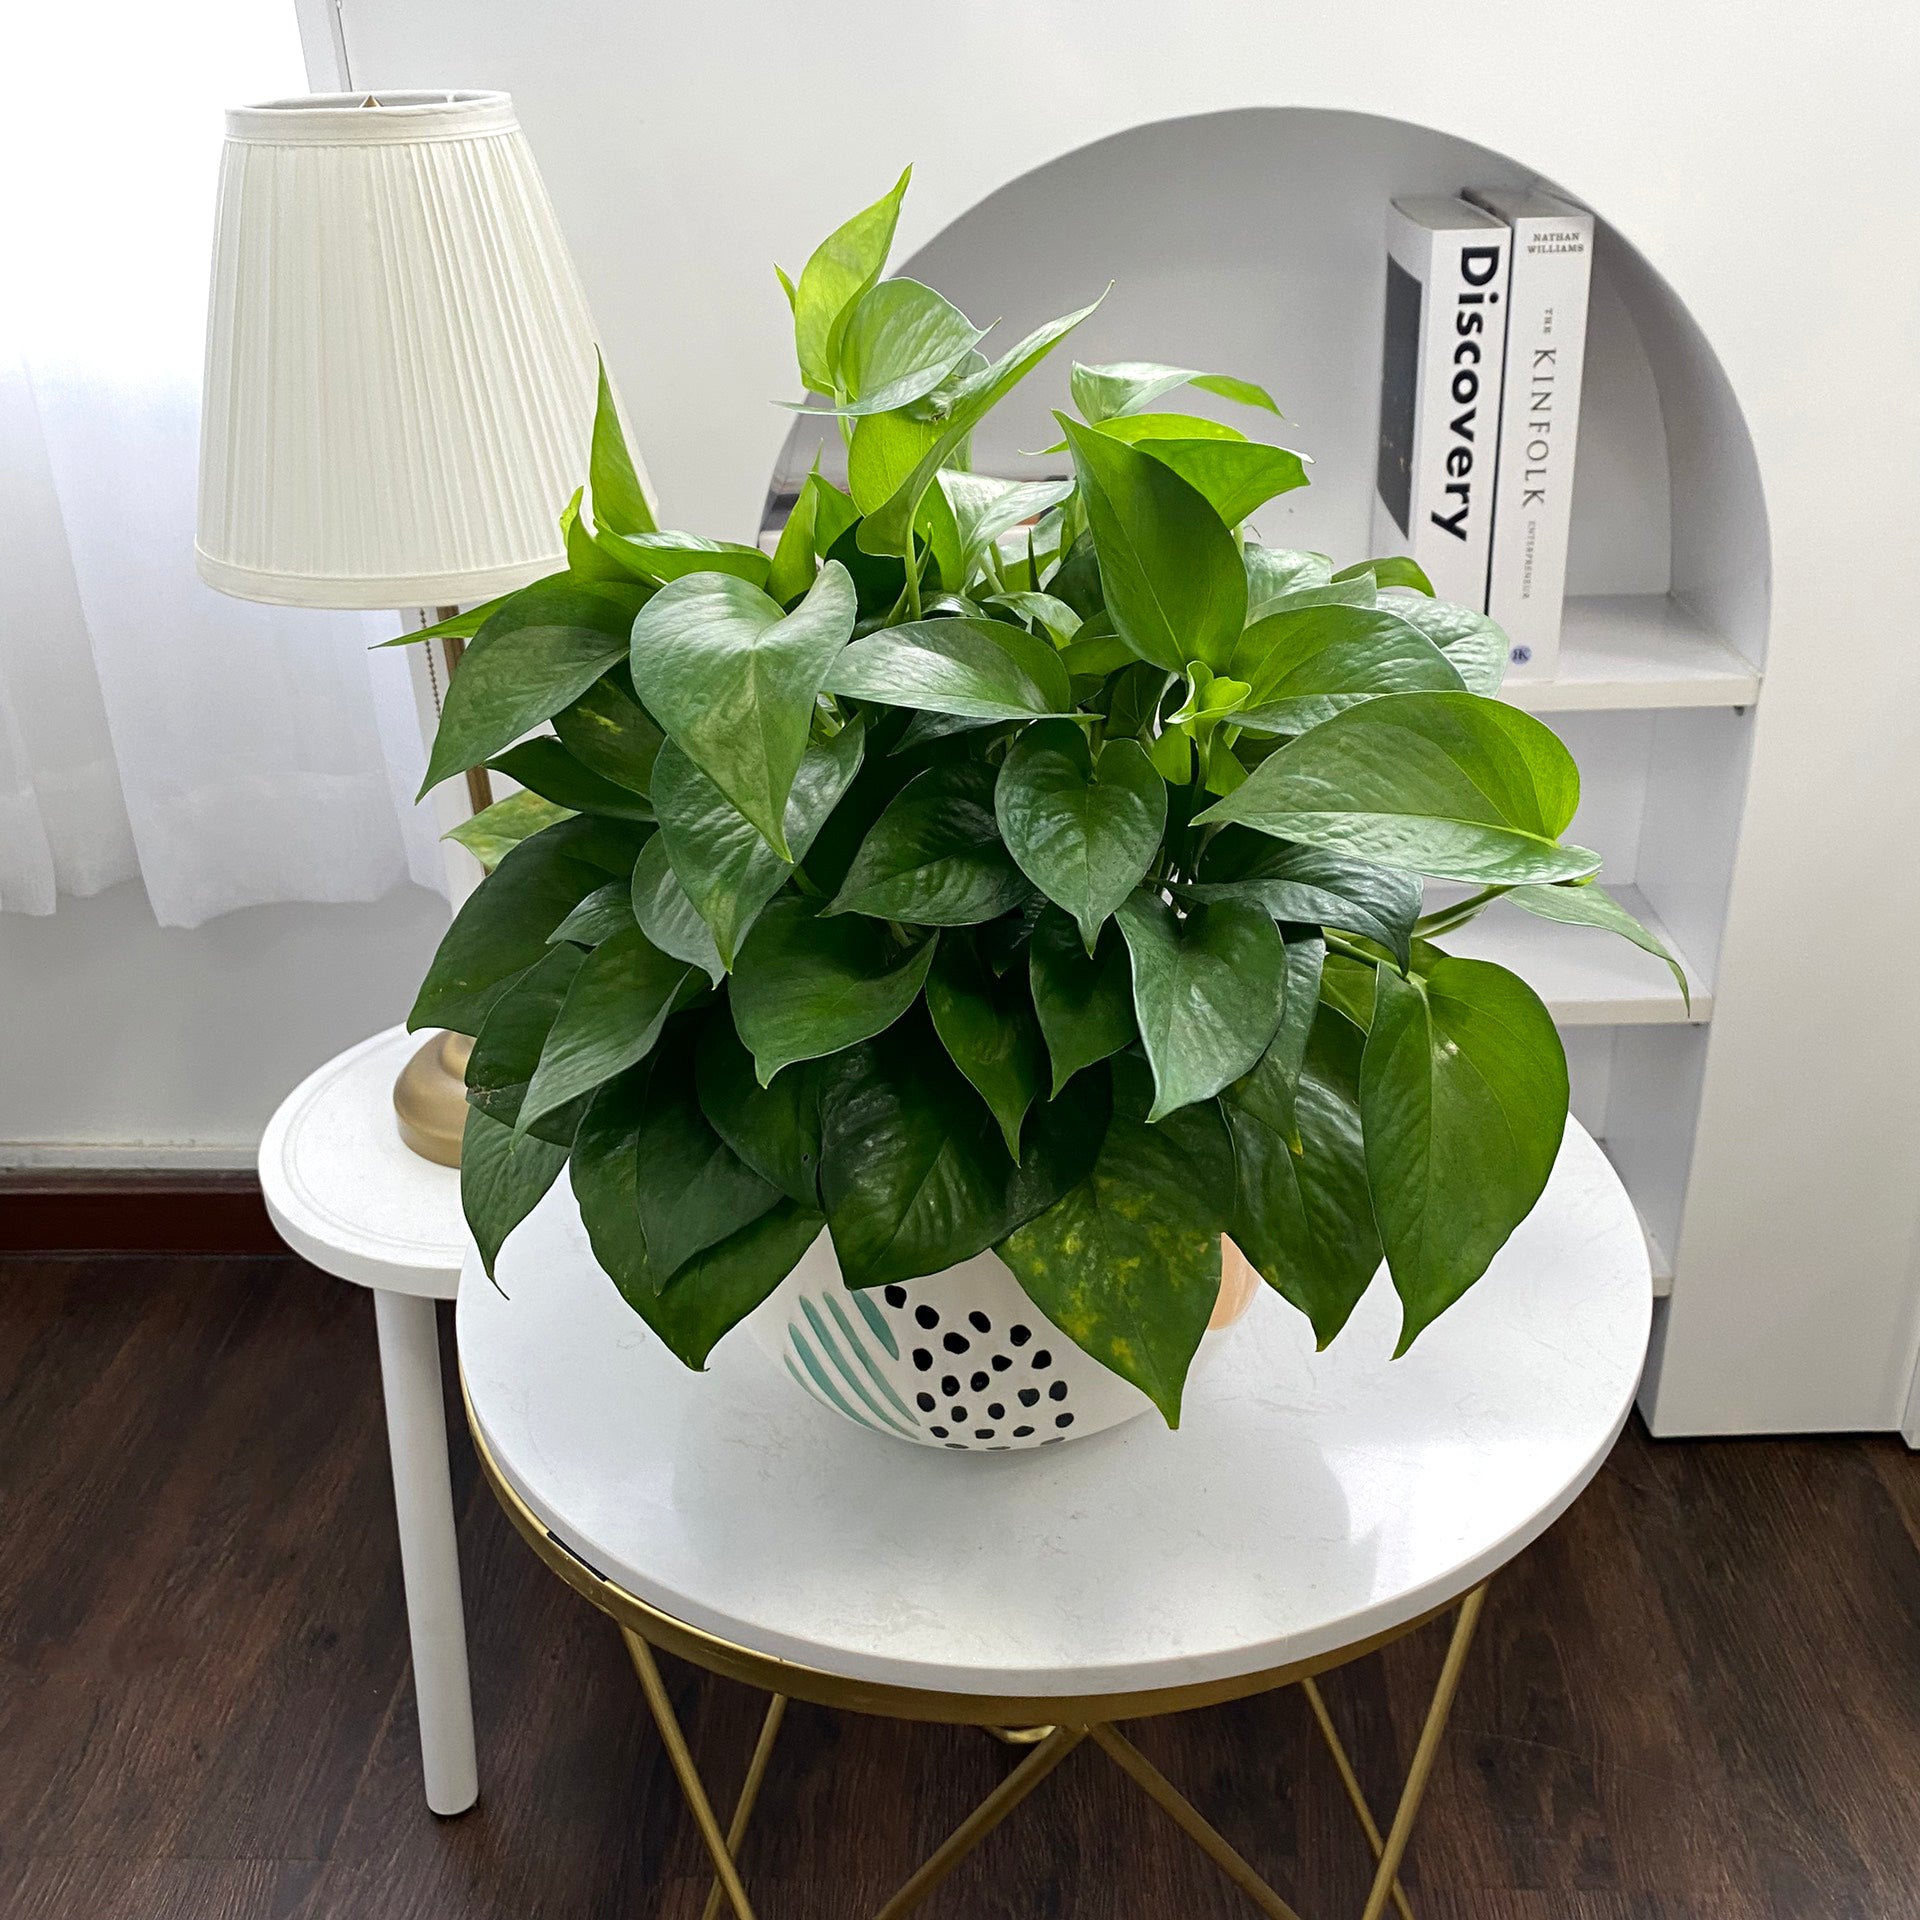 Pothos Jade, Epipremnum aureum 'Jade', best trailing plant for home and office, low light easy-care houseplant, green foliage houseplant